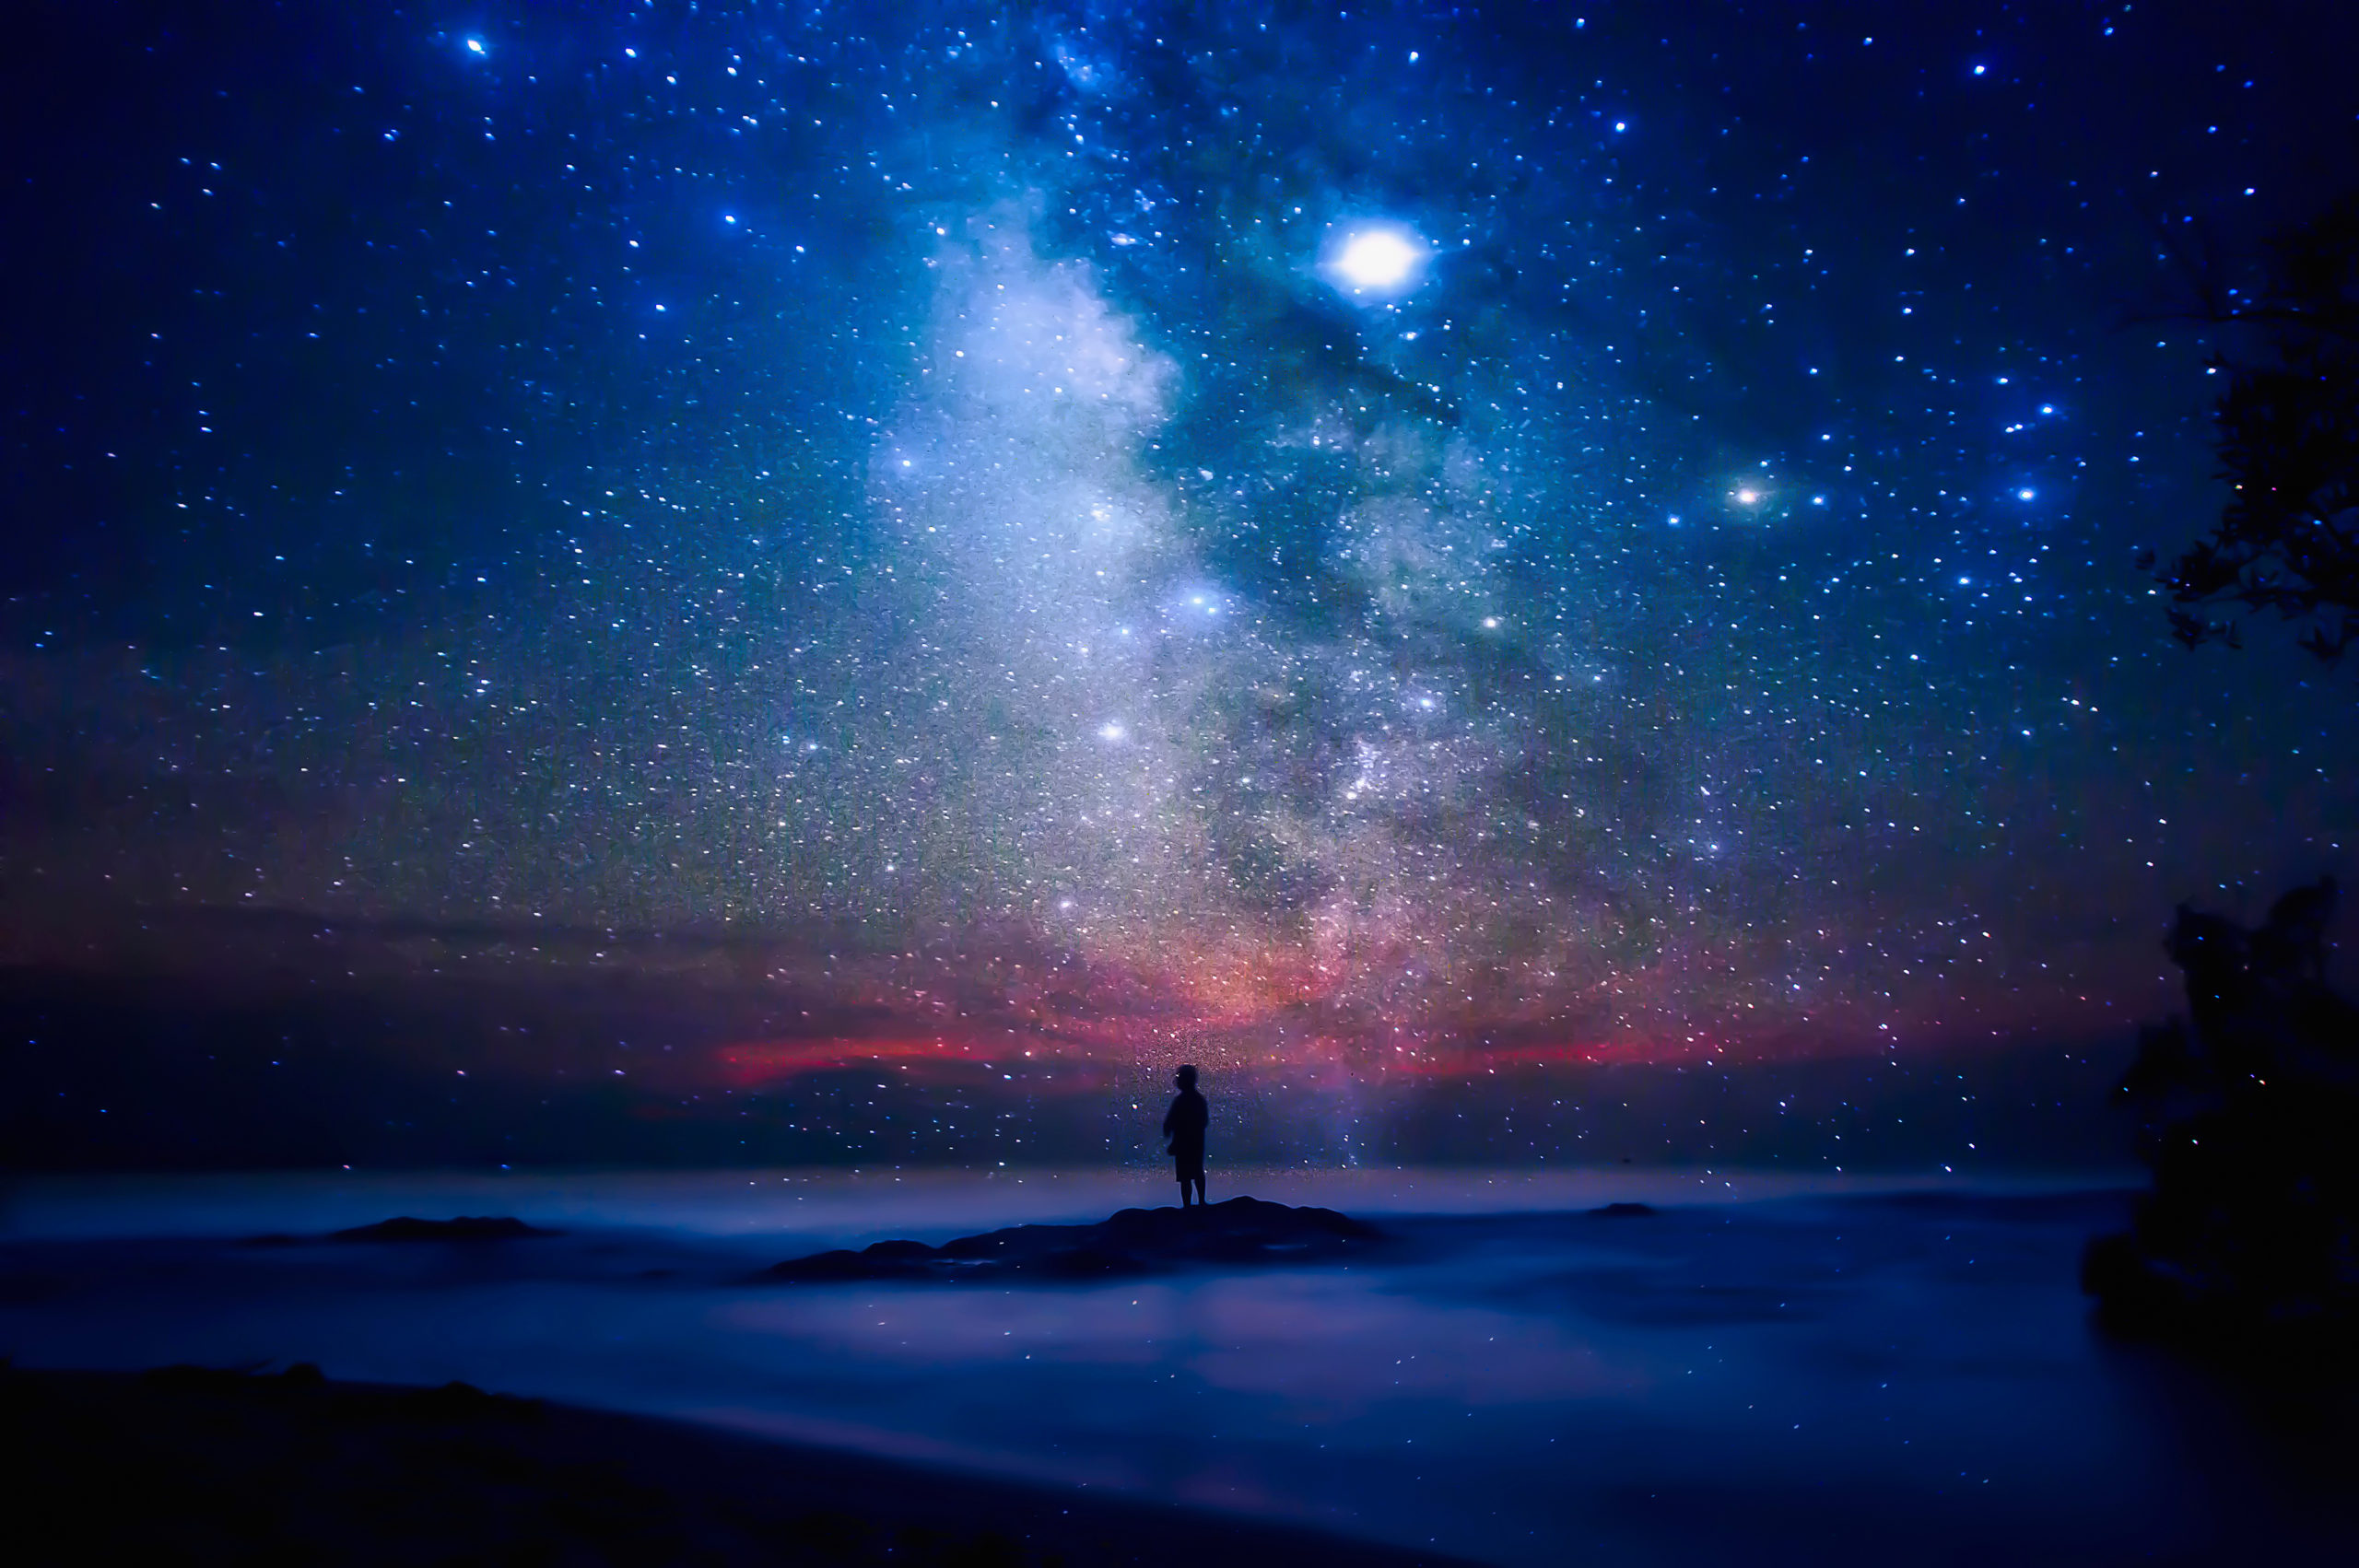 Starry night sky over sea and beach with man silhouette.